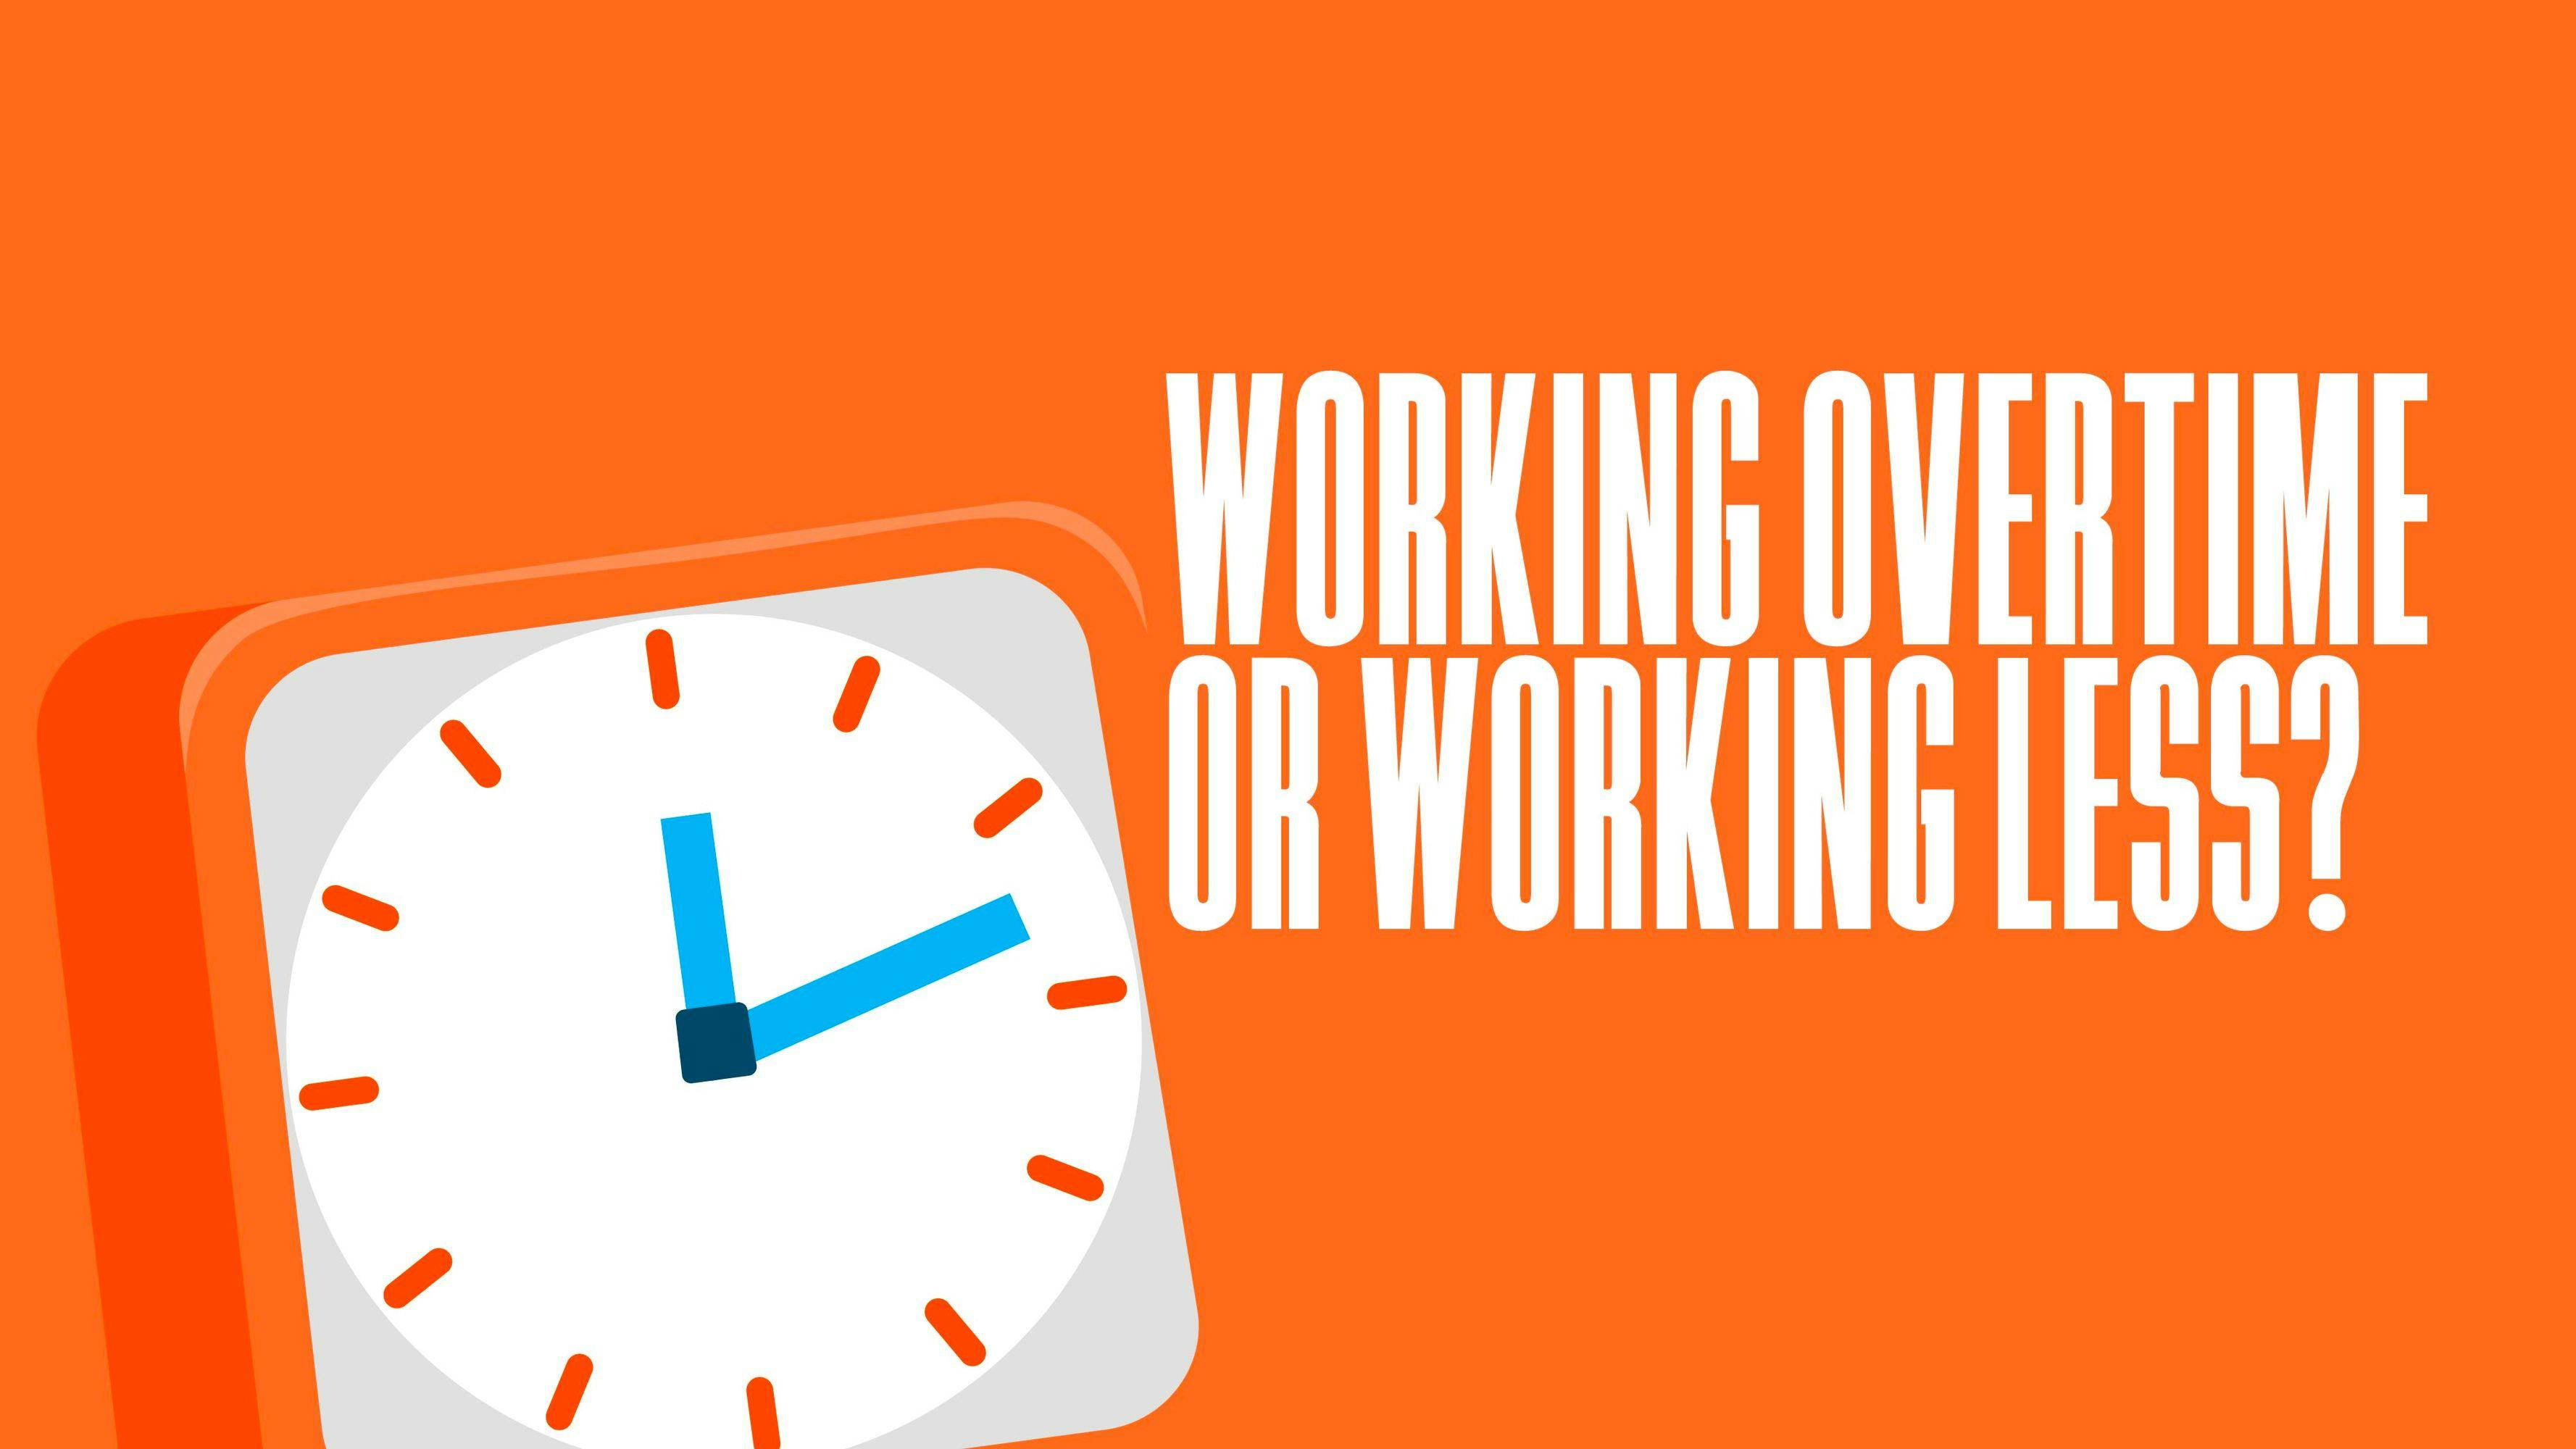 Working Overtime or Working Less?